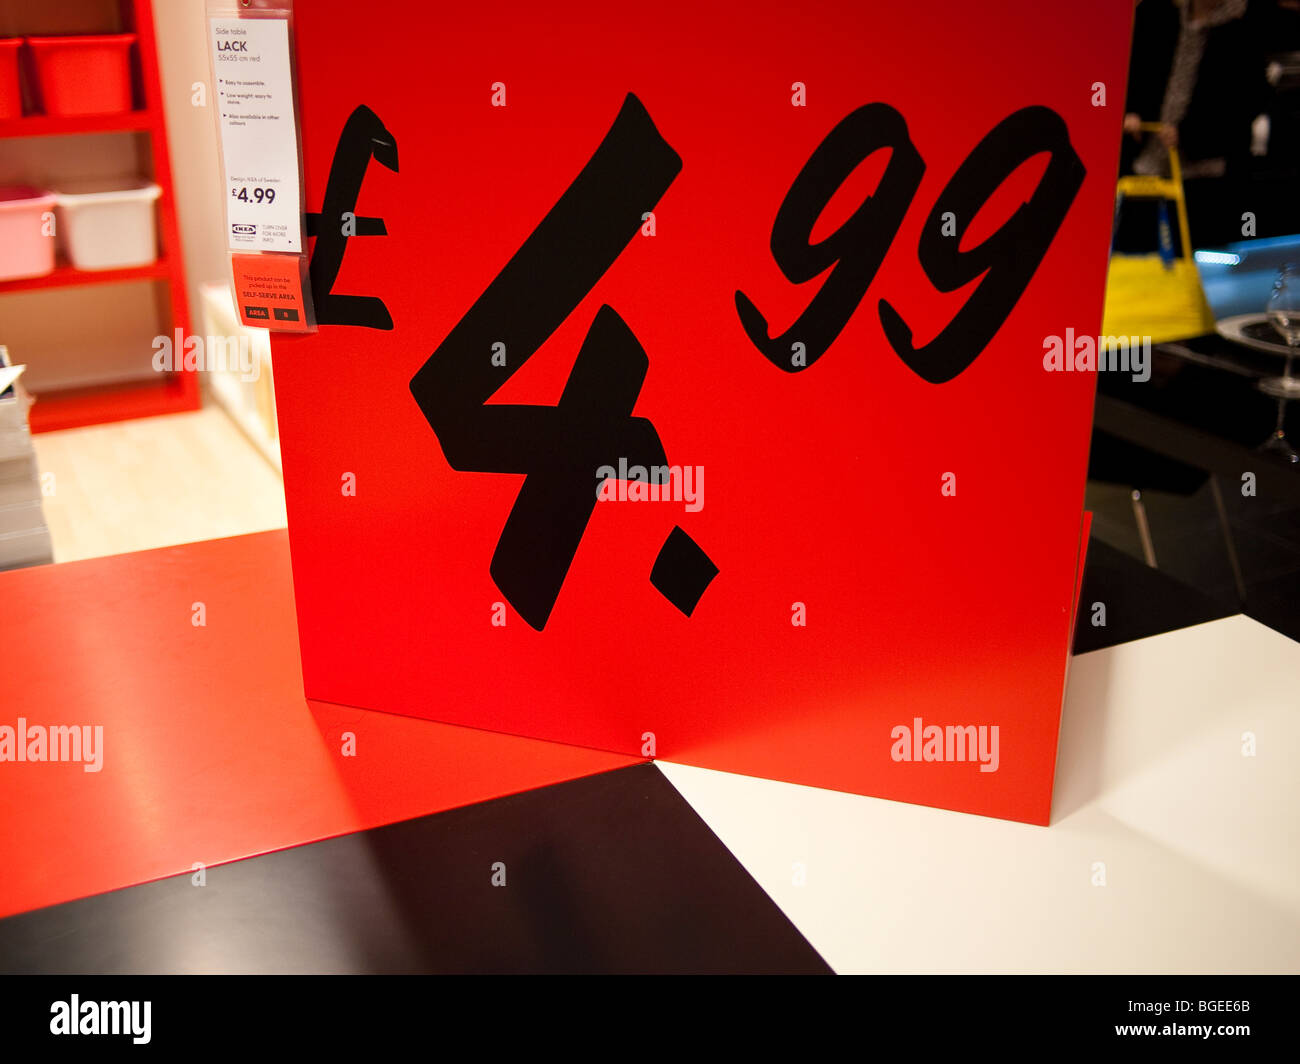 £4.99 Sign in IKEA Stock Photo